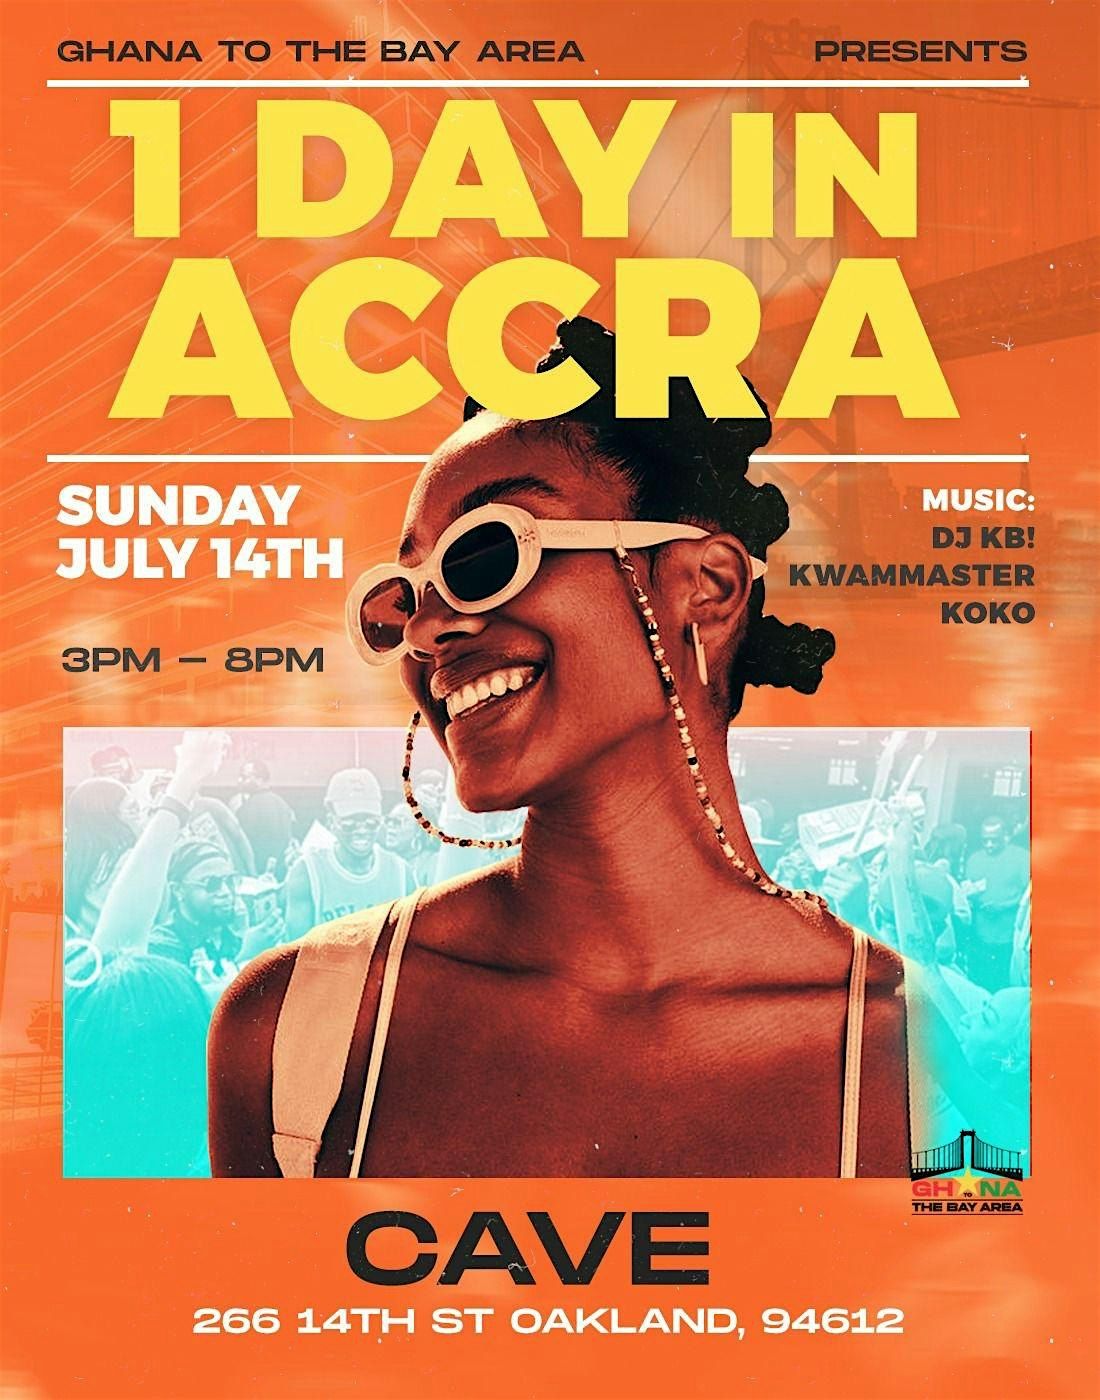 1 DAY IN ACCRA